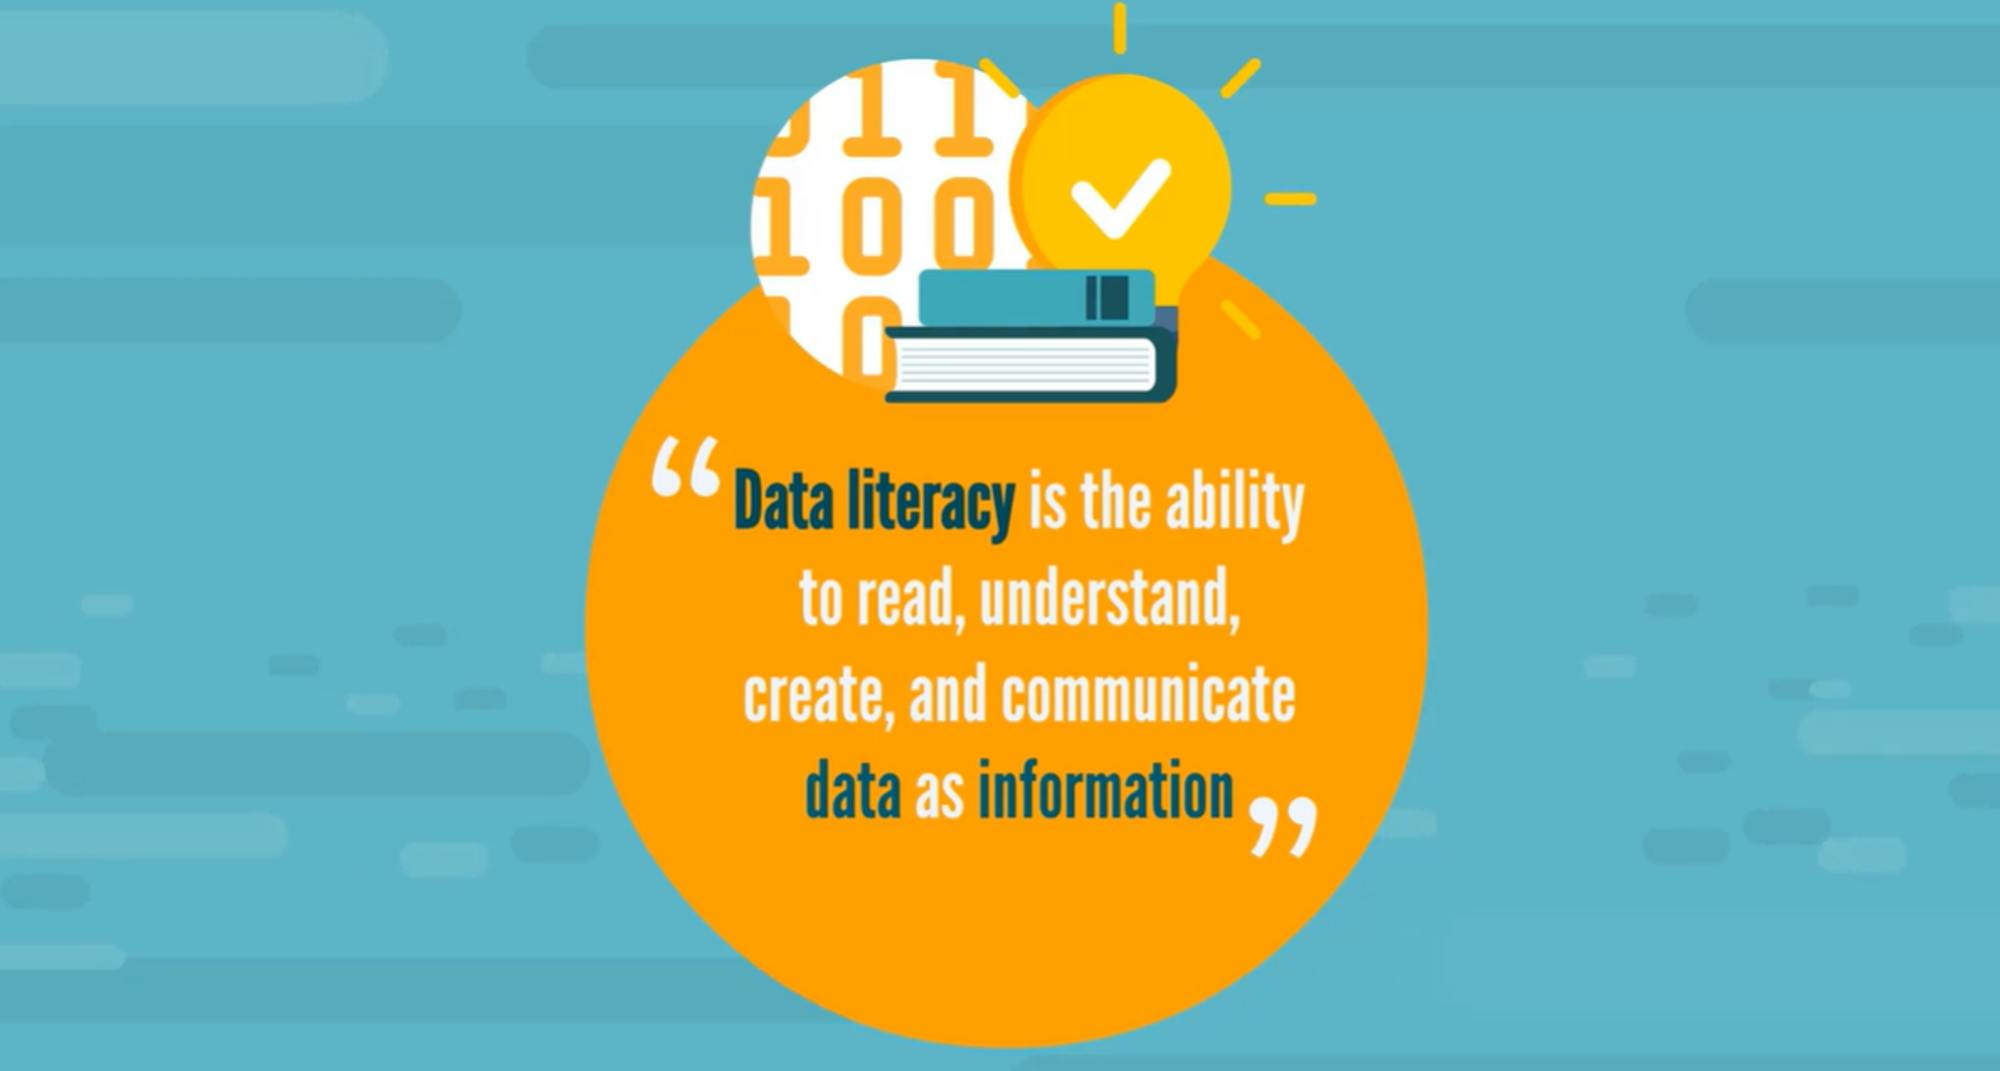 Data literacy is the superpower 🪄of understanding, analyzing, and using data wisely. It's like having a data compass to uncover hidden insights, make informed decisions, and save the world from bad spreadsheets📃. It involves skills such as data analysis, data visualization, statistical reasoning, and critical thinking🧠.